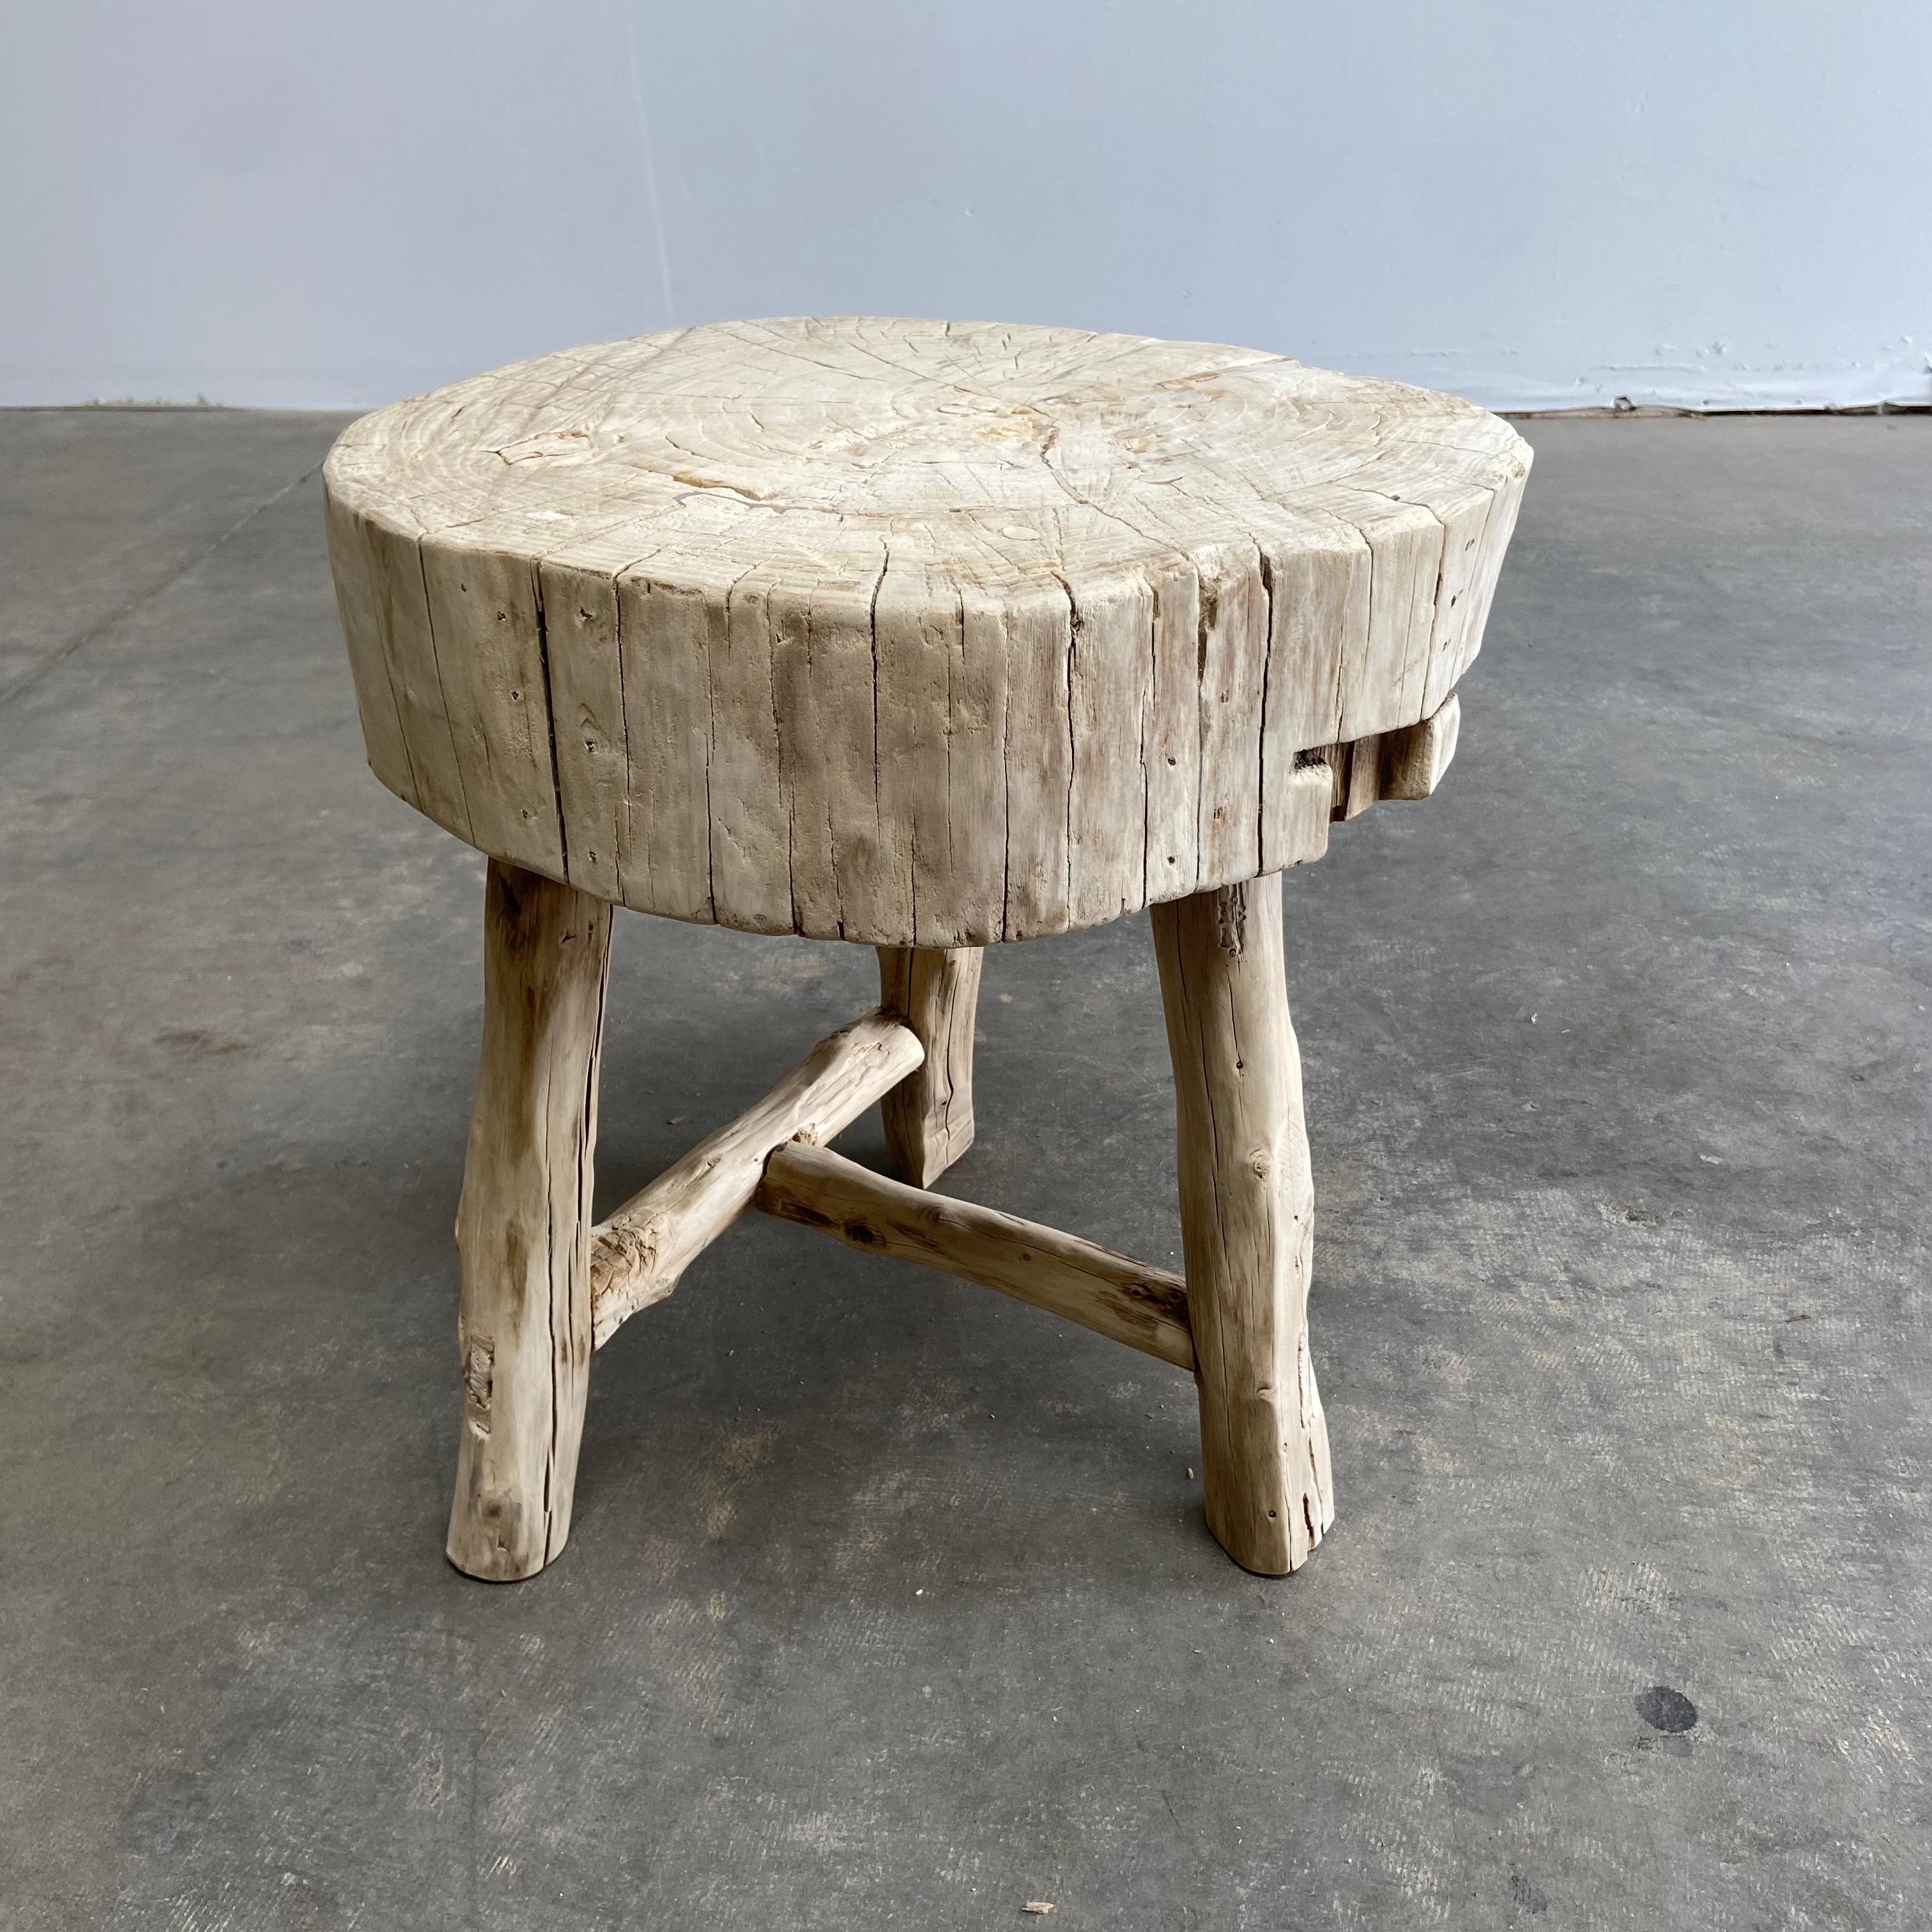 Elm Stump Slice side table 17”rd. X 19”H
Natural wood side table stump with legs. Beautiful solid sliced stump, great for use as a side table, or drink table.
Natural wood in raw finish, with beautiful natural markings. Legs are solid and sturdy,